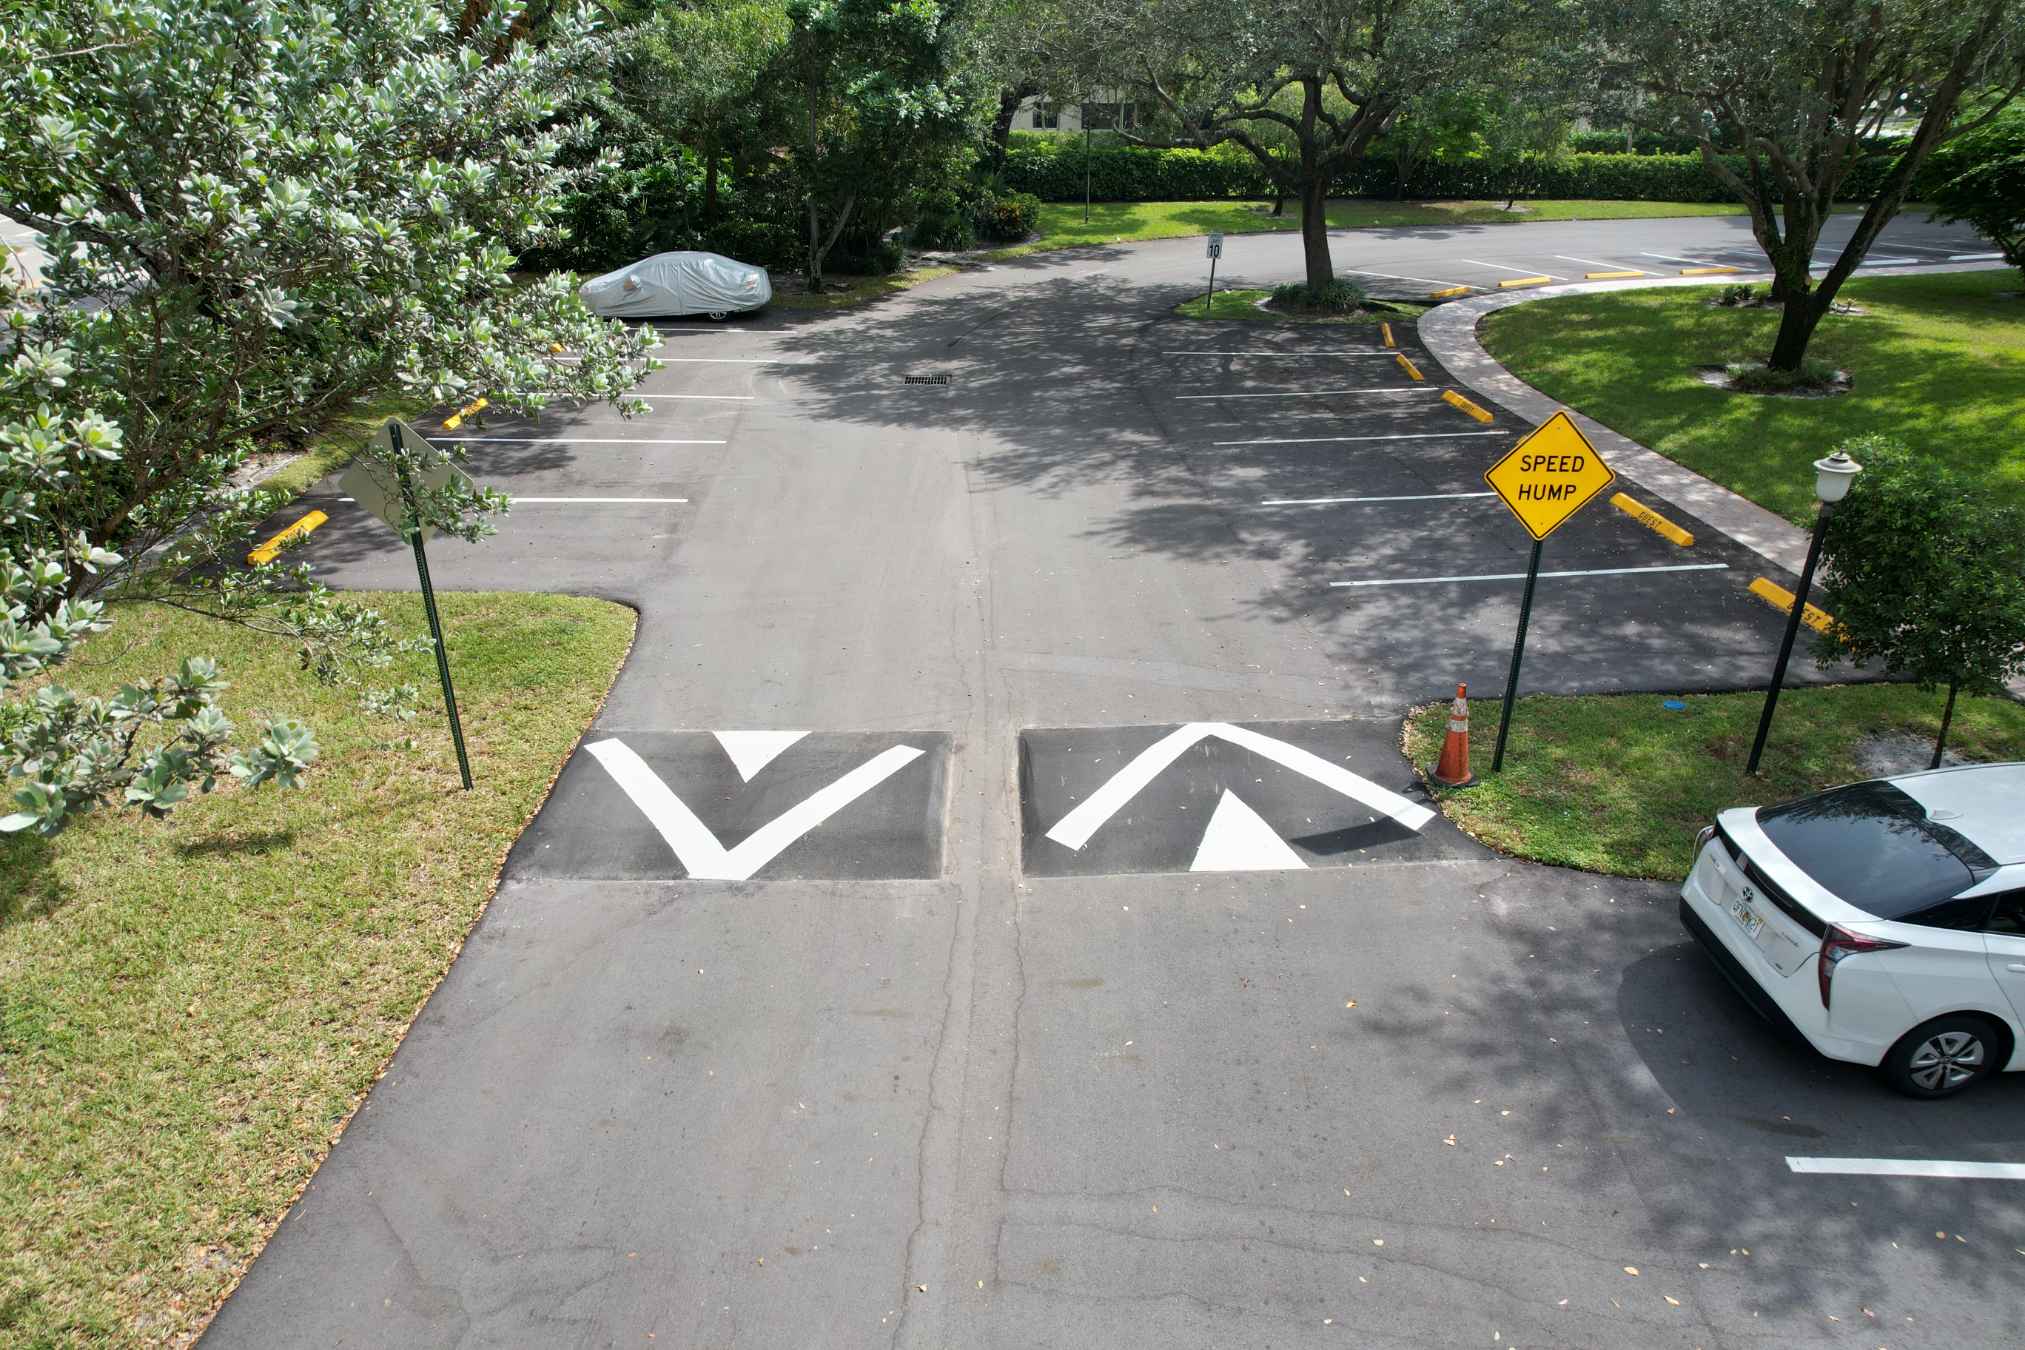 Commercial paving contractor, 3-D Paving and Sealcoating in Coral Springs installs double wide custom asphalt speed bumps at an apartment complex in Fort Myers, FL.